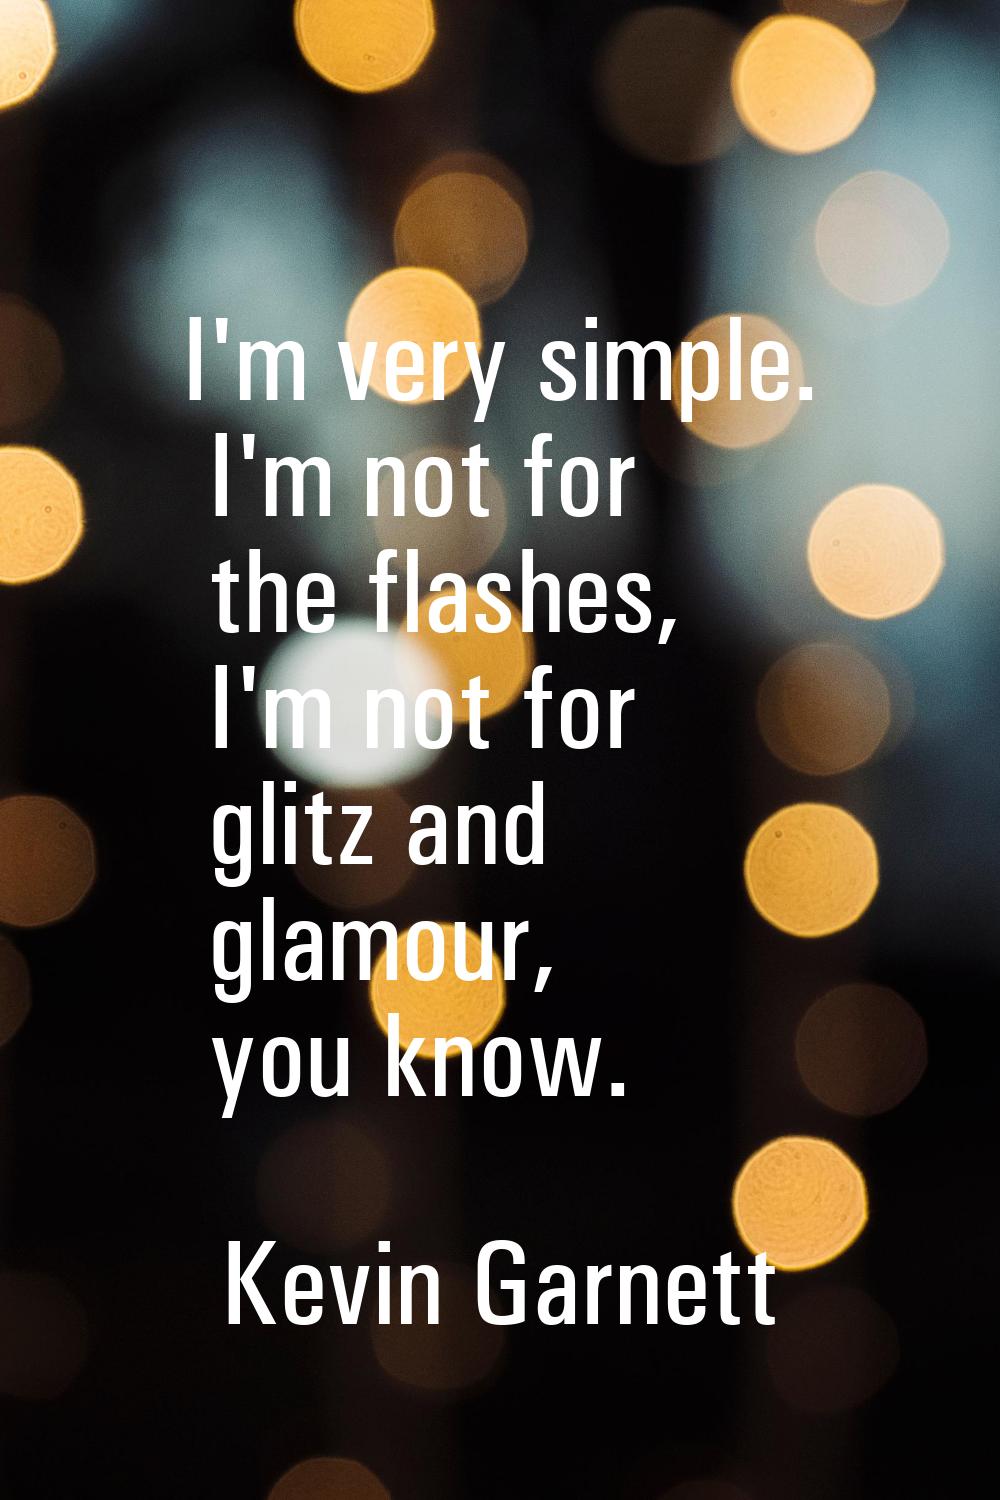 I'm very simple. I'm not for the flashes, I'm not for glitz and glamour, you know.